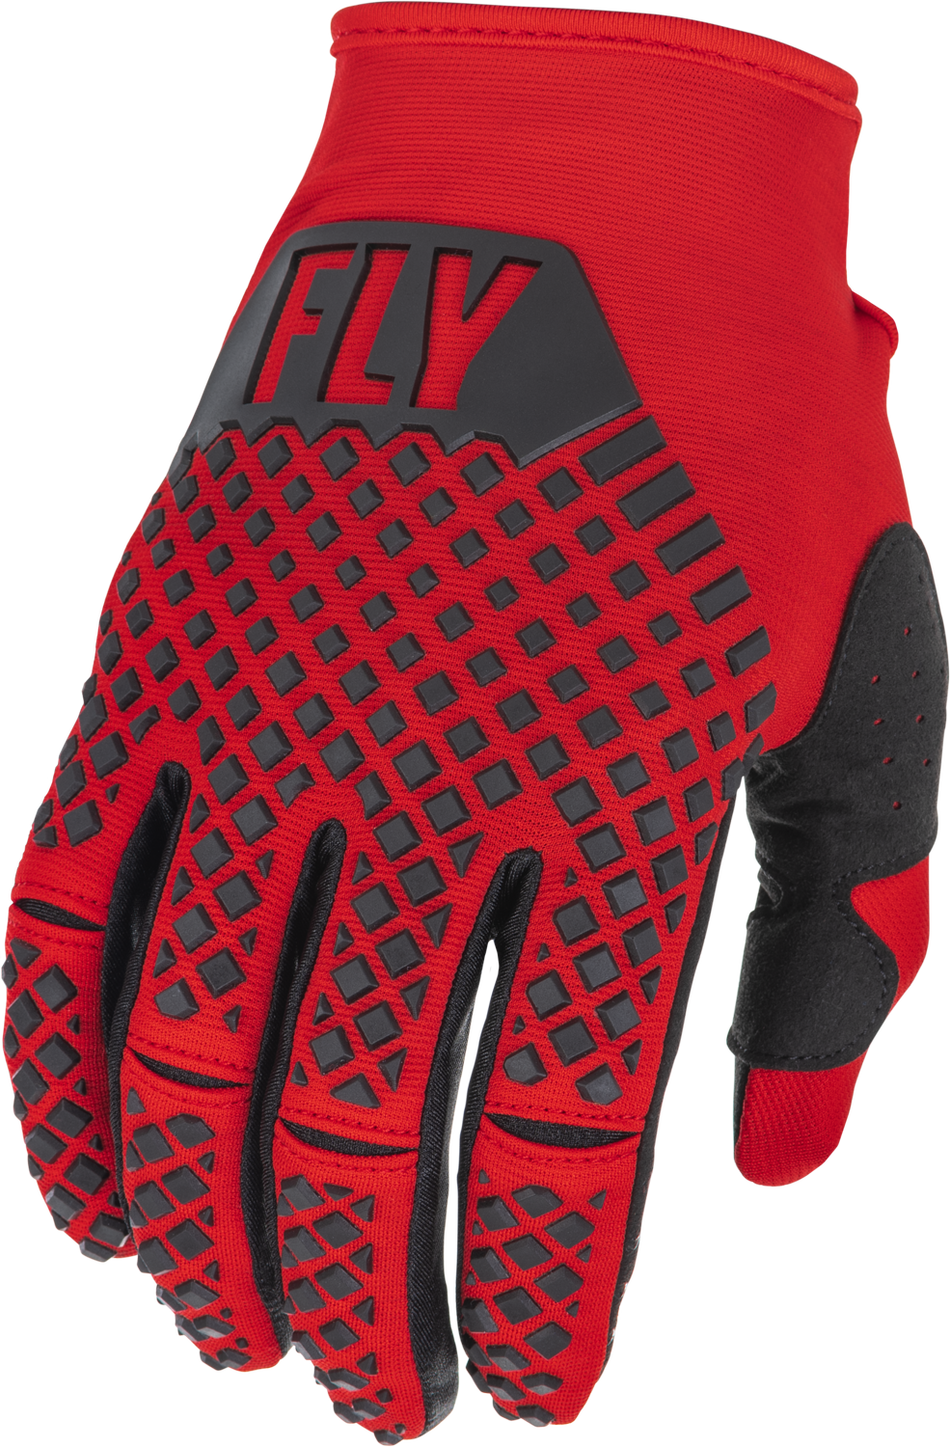 FLY RACING Youth Kinetic Gloves Red/Black Yl 375-413YL